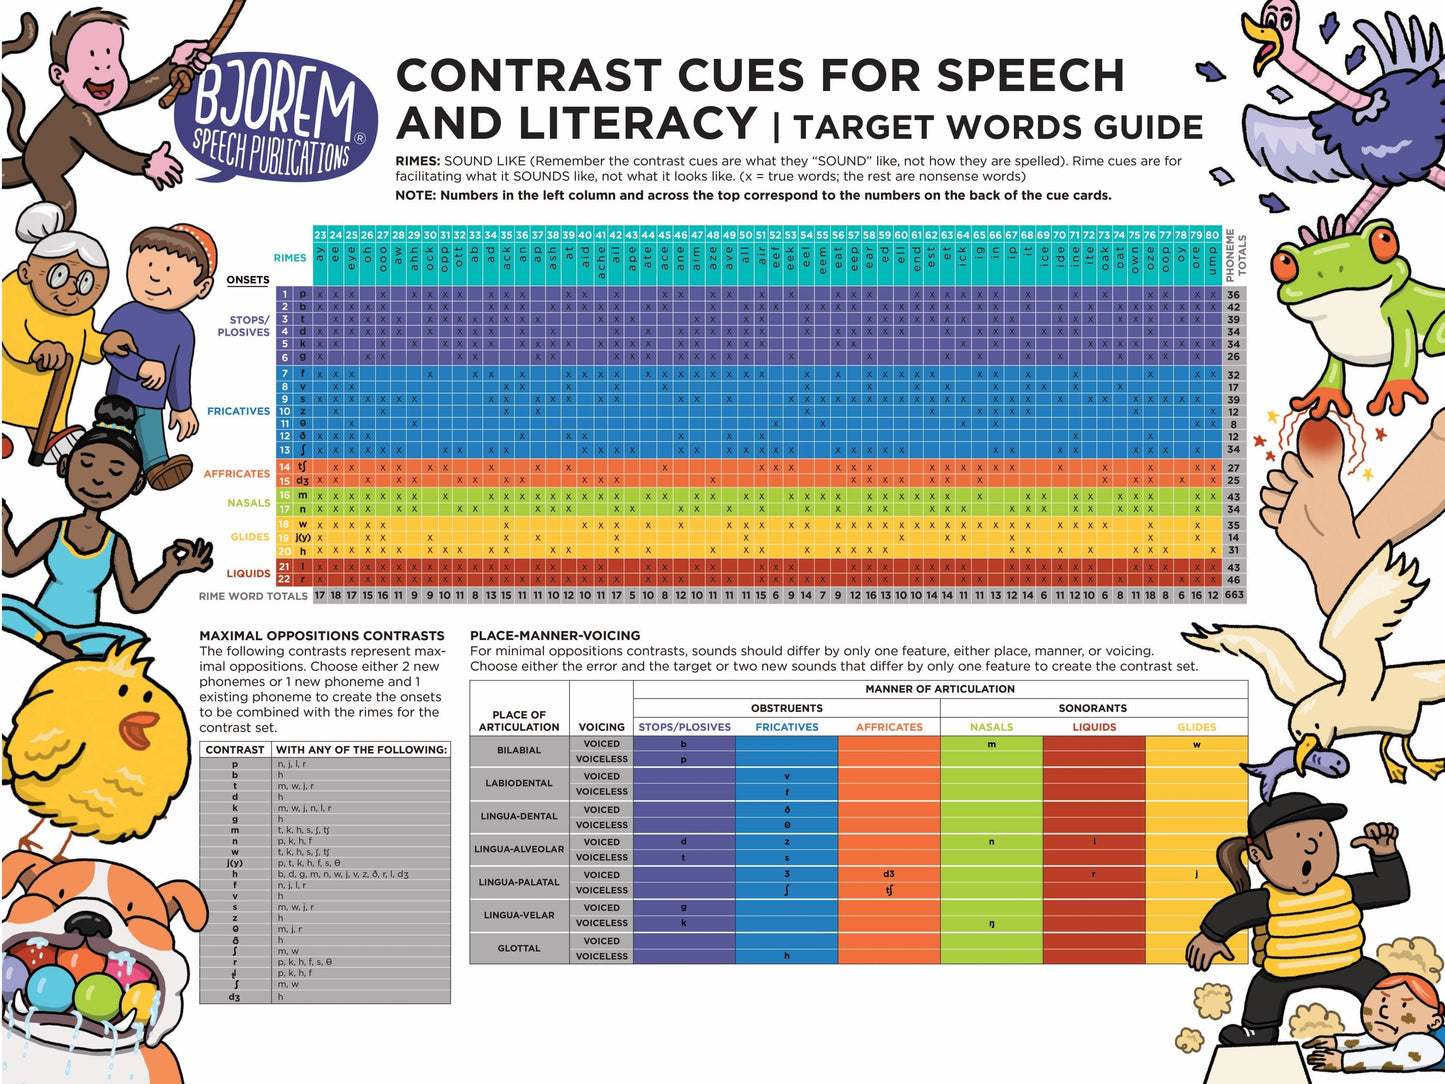 Contrast Cues for Speech & Literacy POSTER - Download